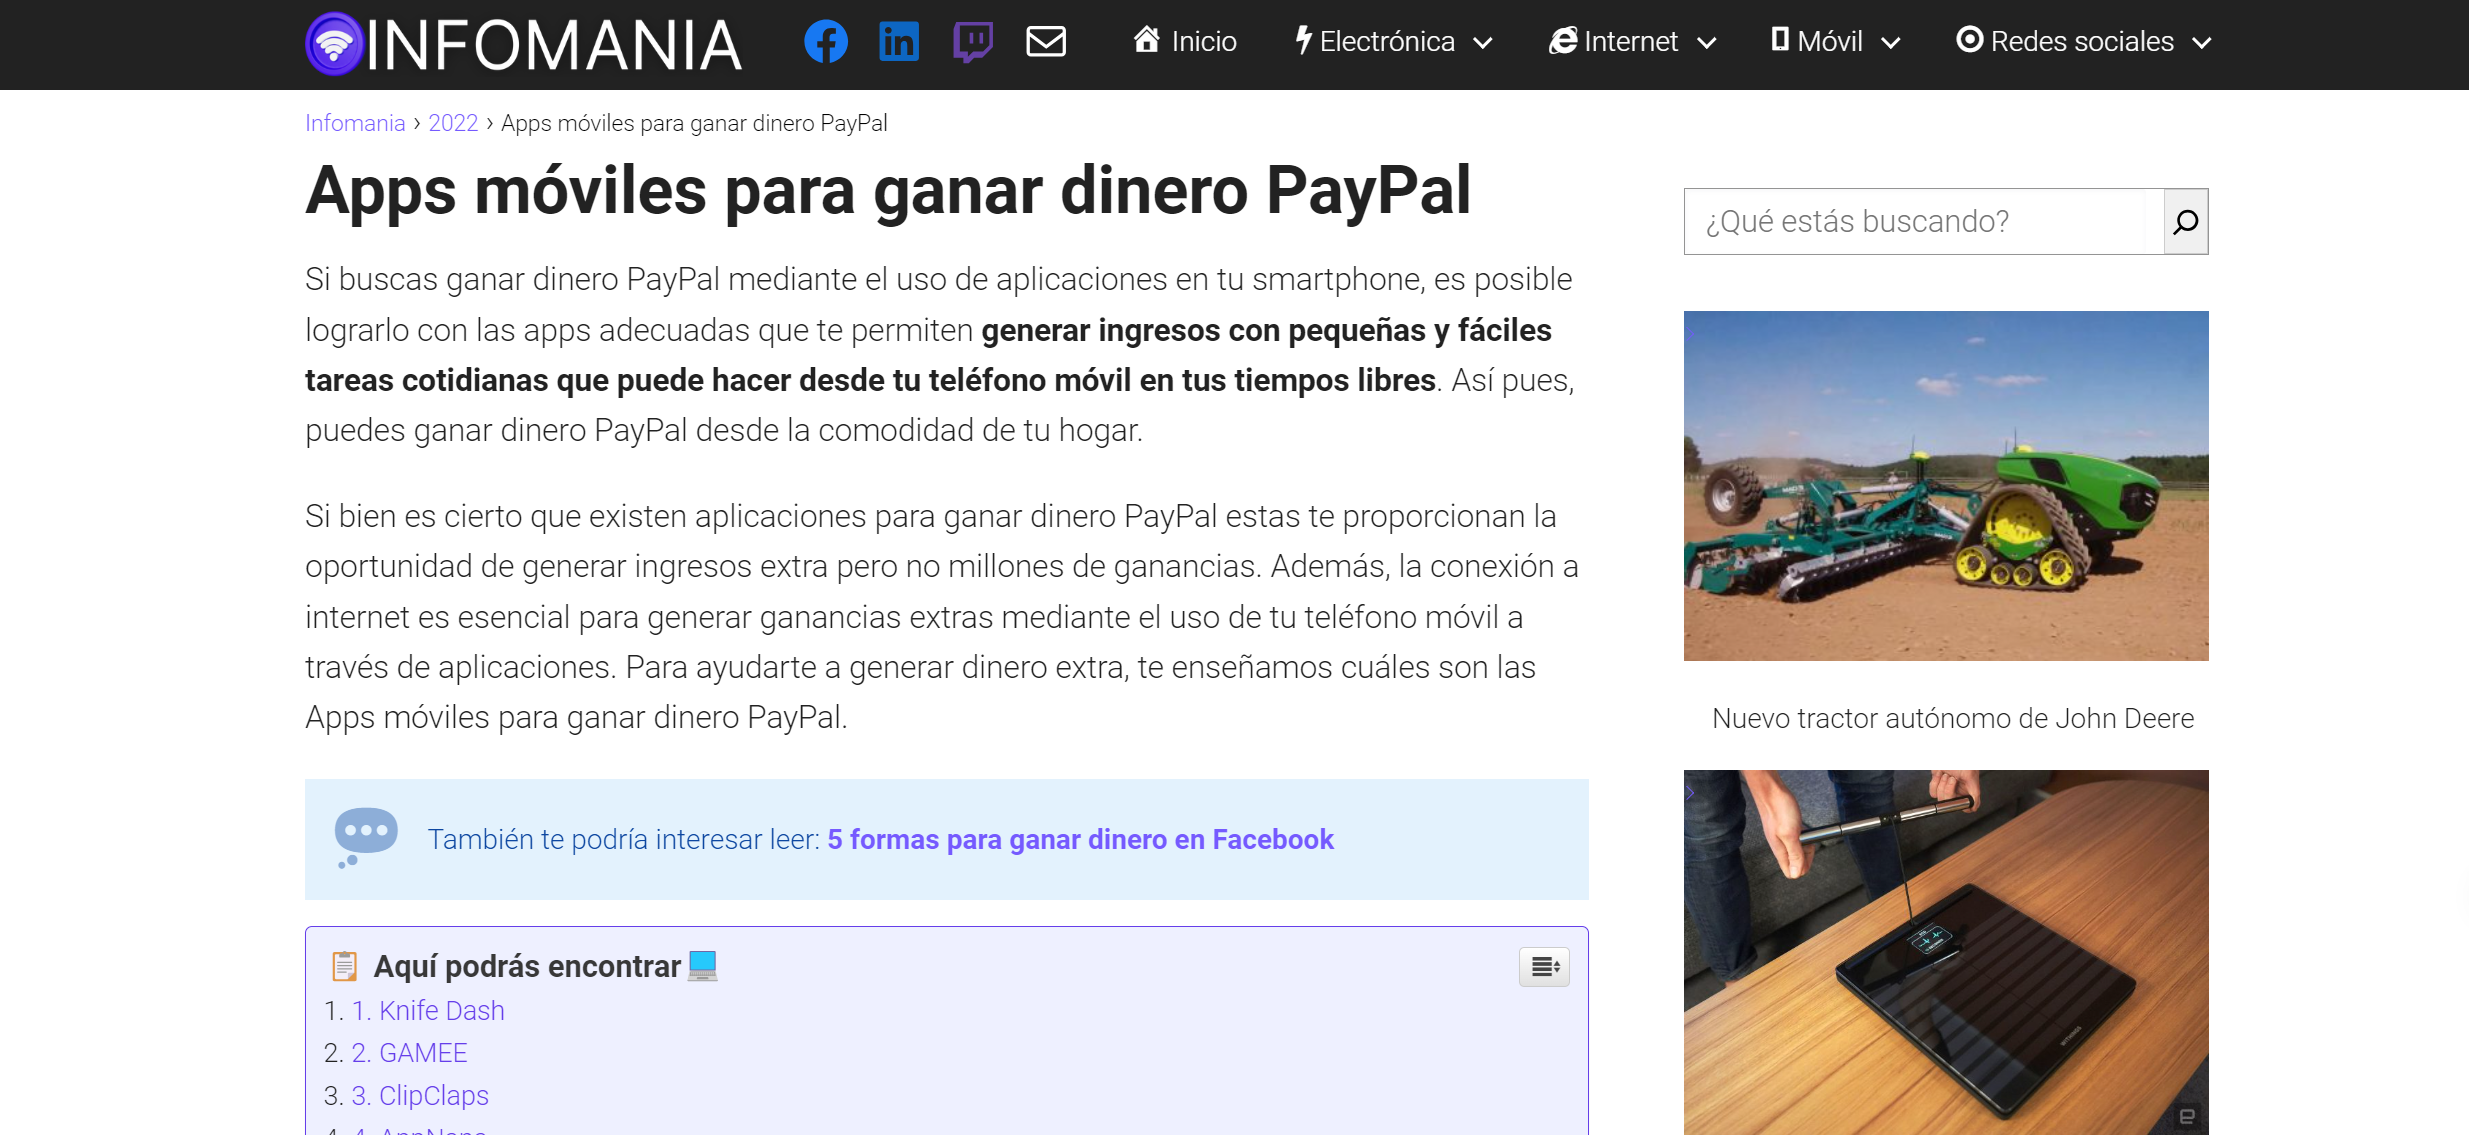 https://infomania.space/ganar-dinero-paypal-1/293/2022/I